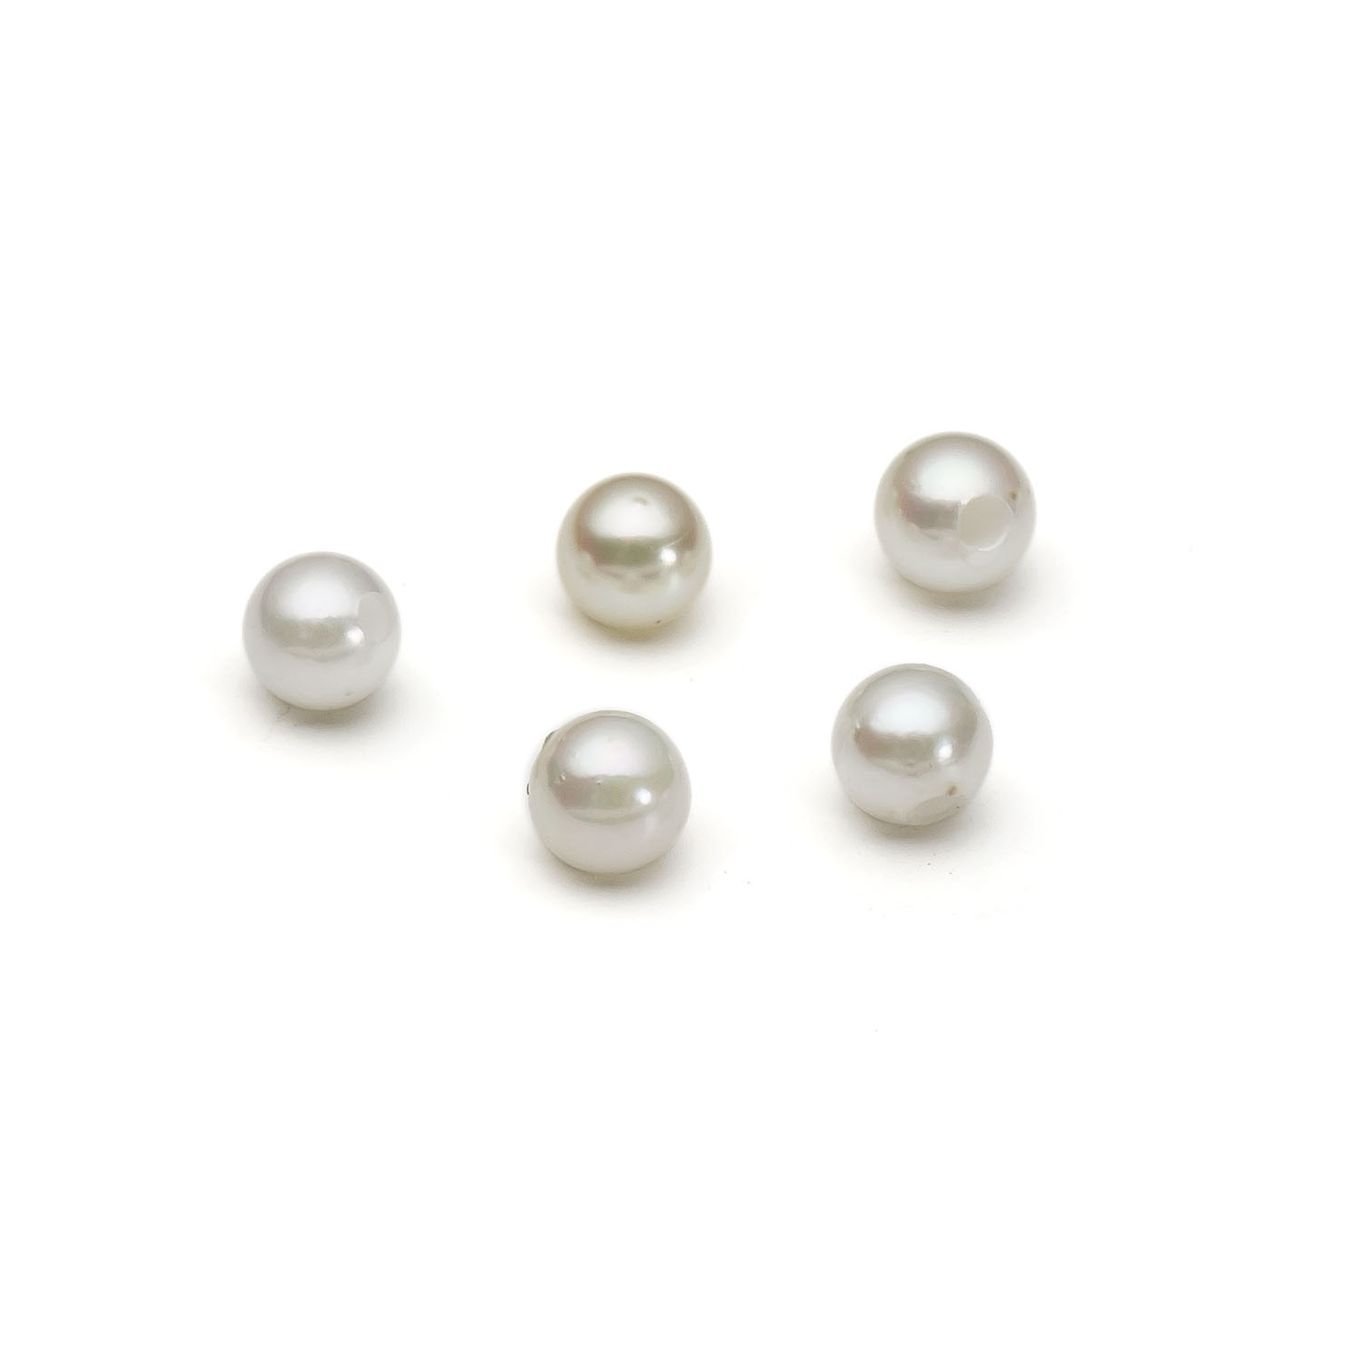 White Circular Number Beads By Creatology™